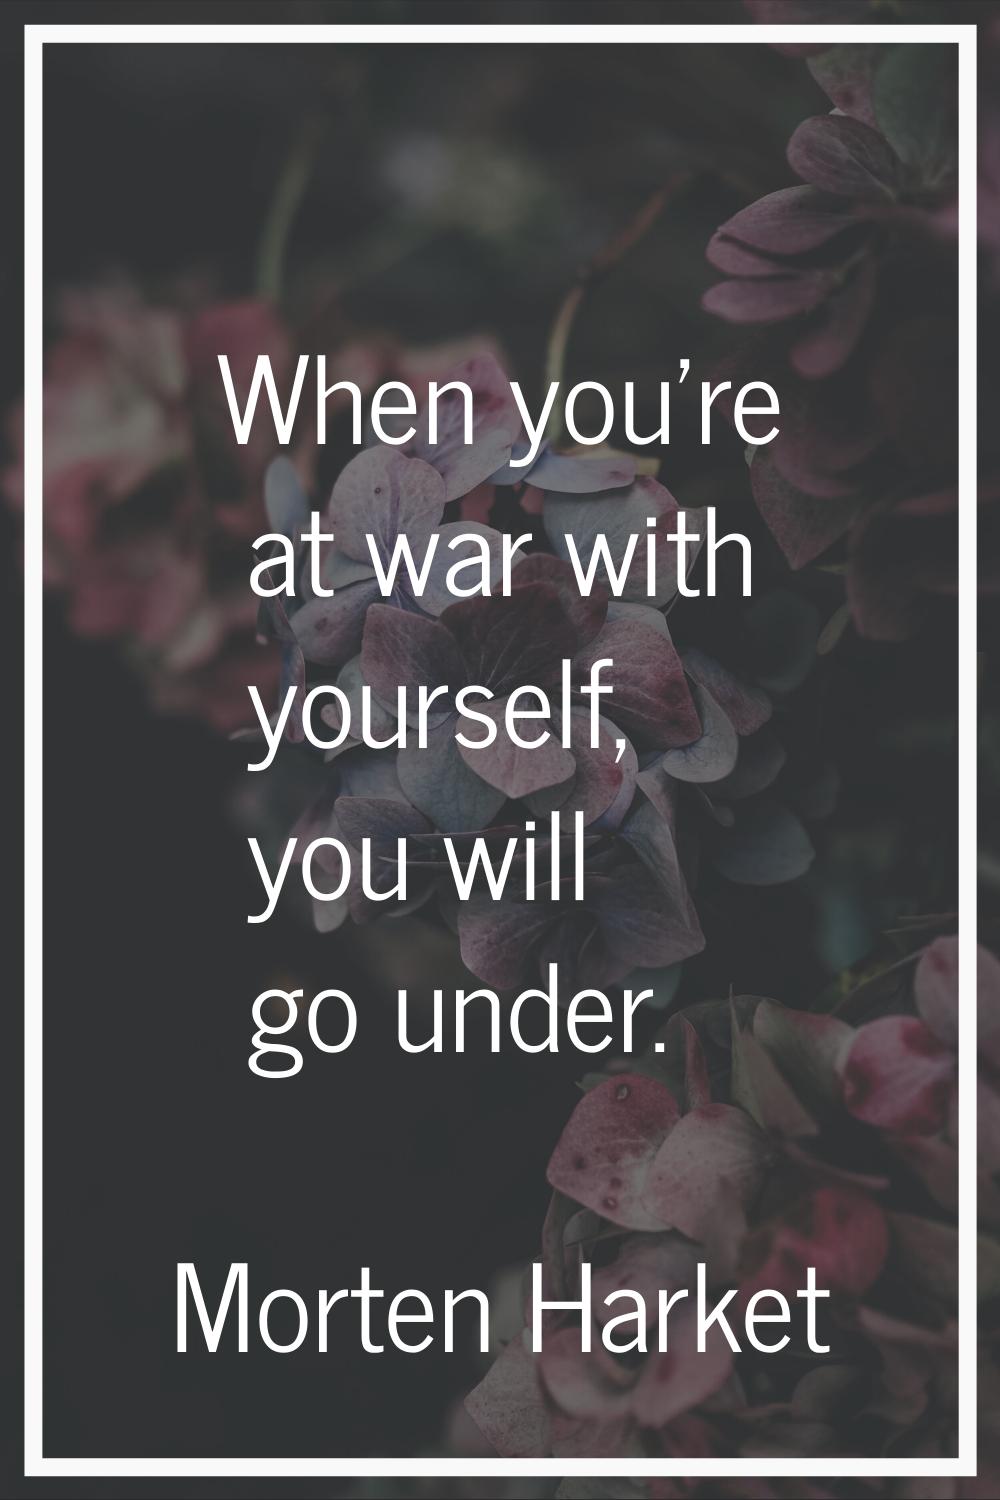 When you're at war with yourself, you will go under.